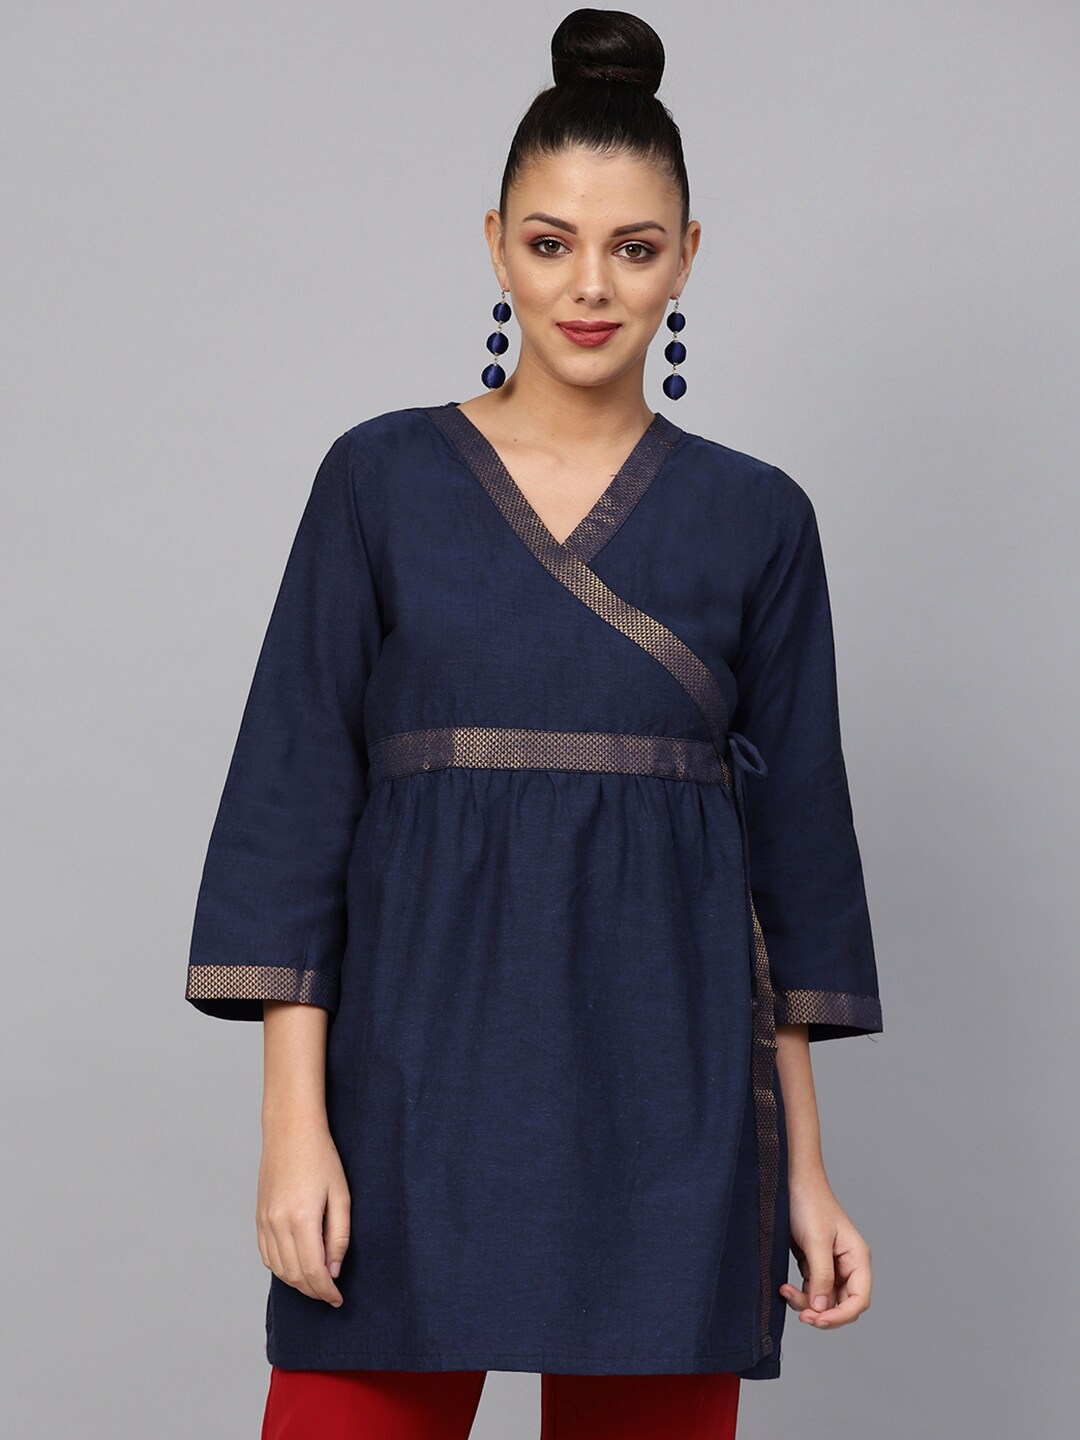 Women's  Navy Blue Solid Angrakha Tunic - Wahe-NOOR